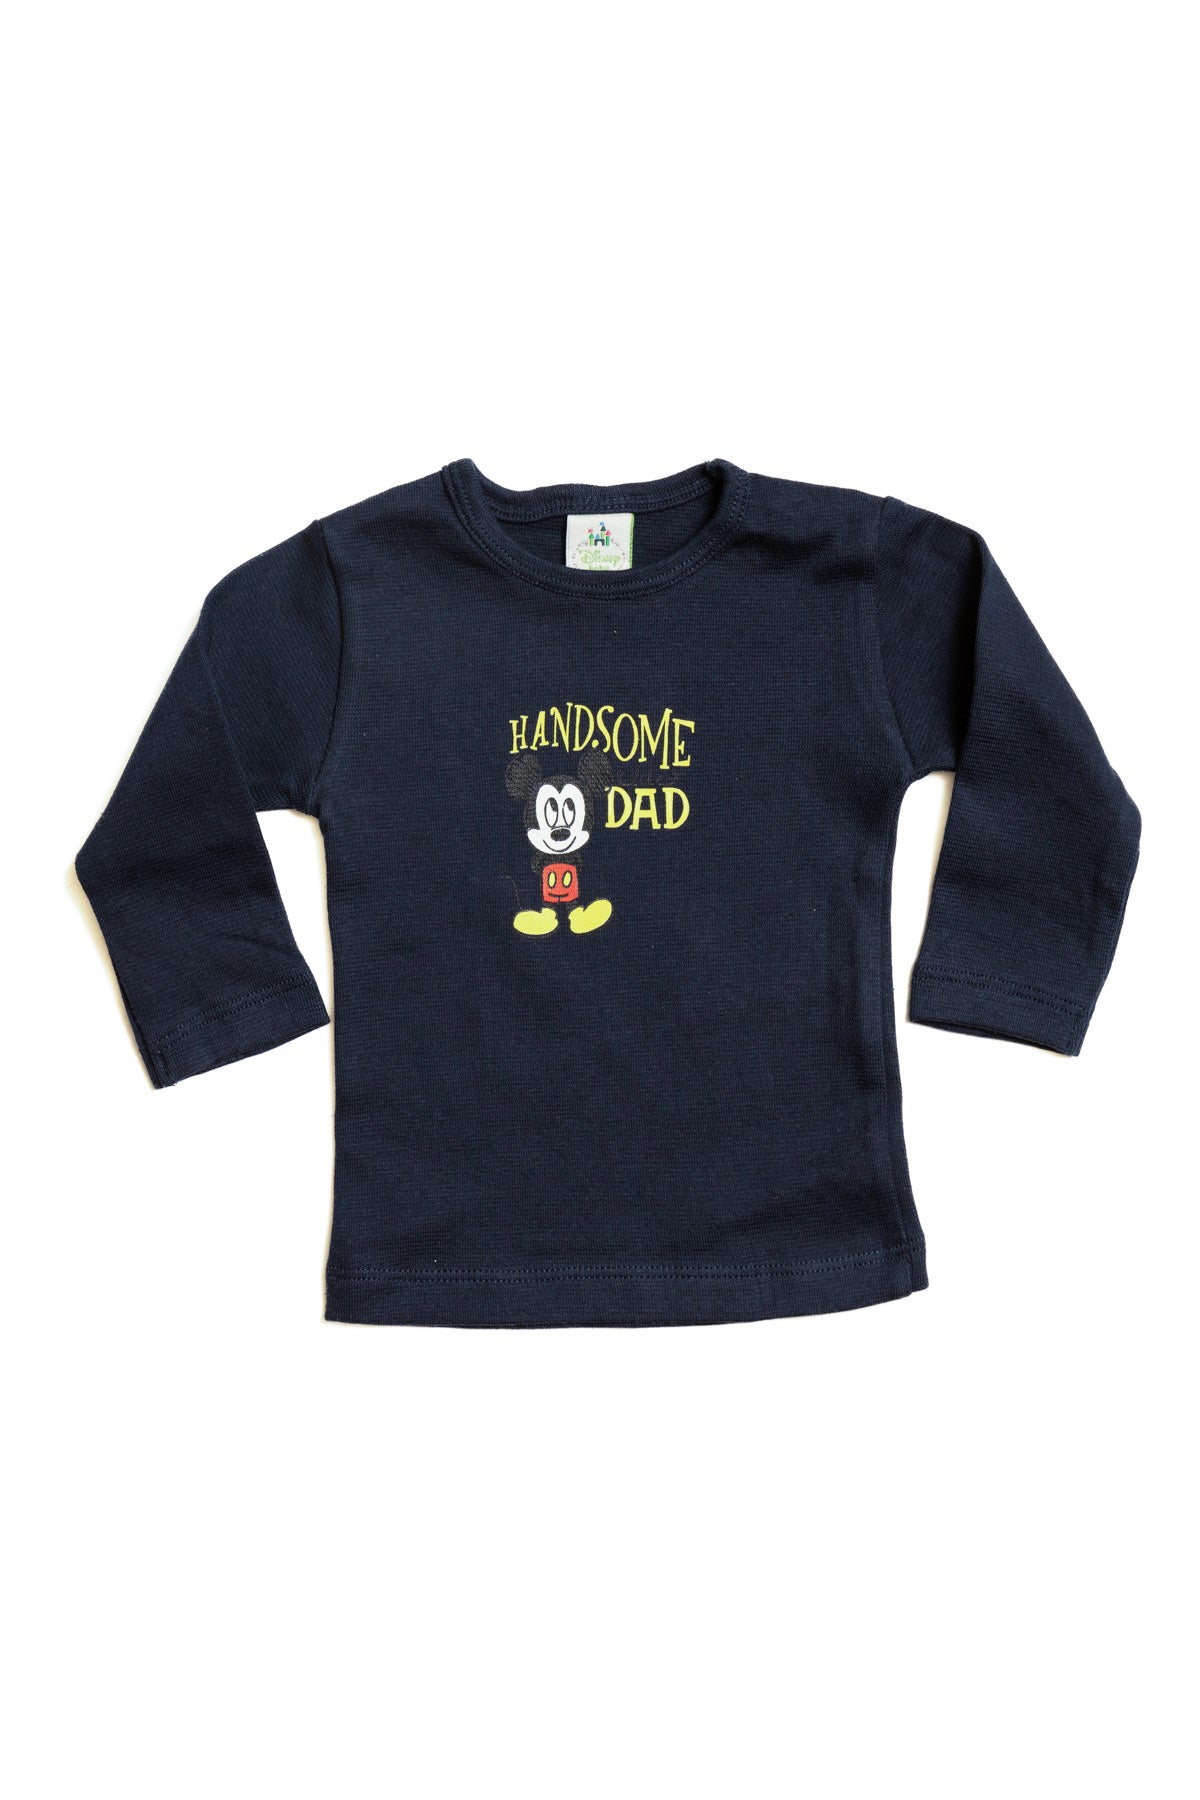 T-Shirt Baby Mickey "Handsome Dad" sleeve 4041